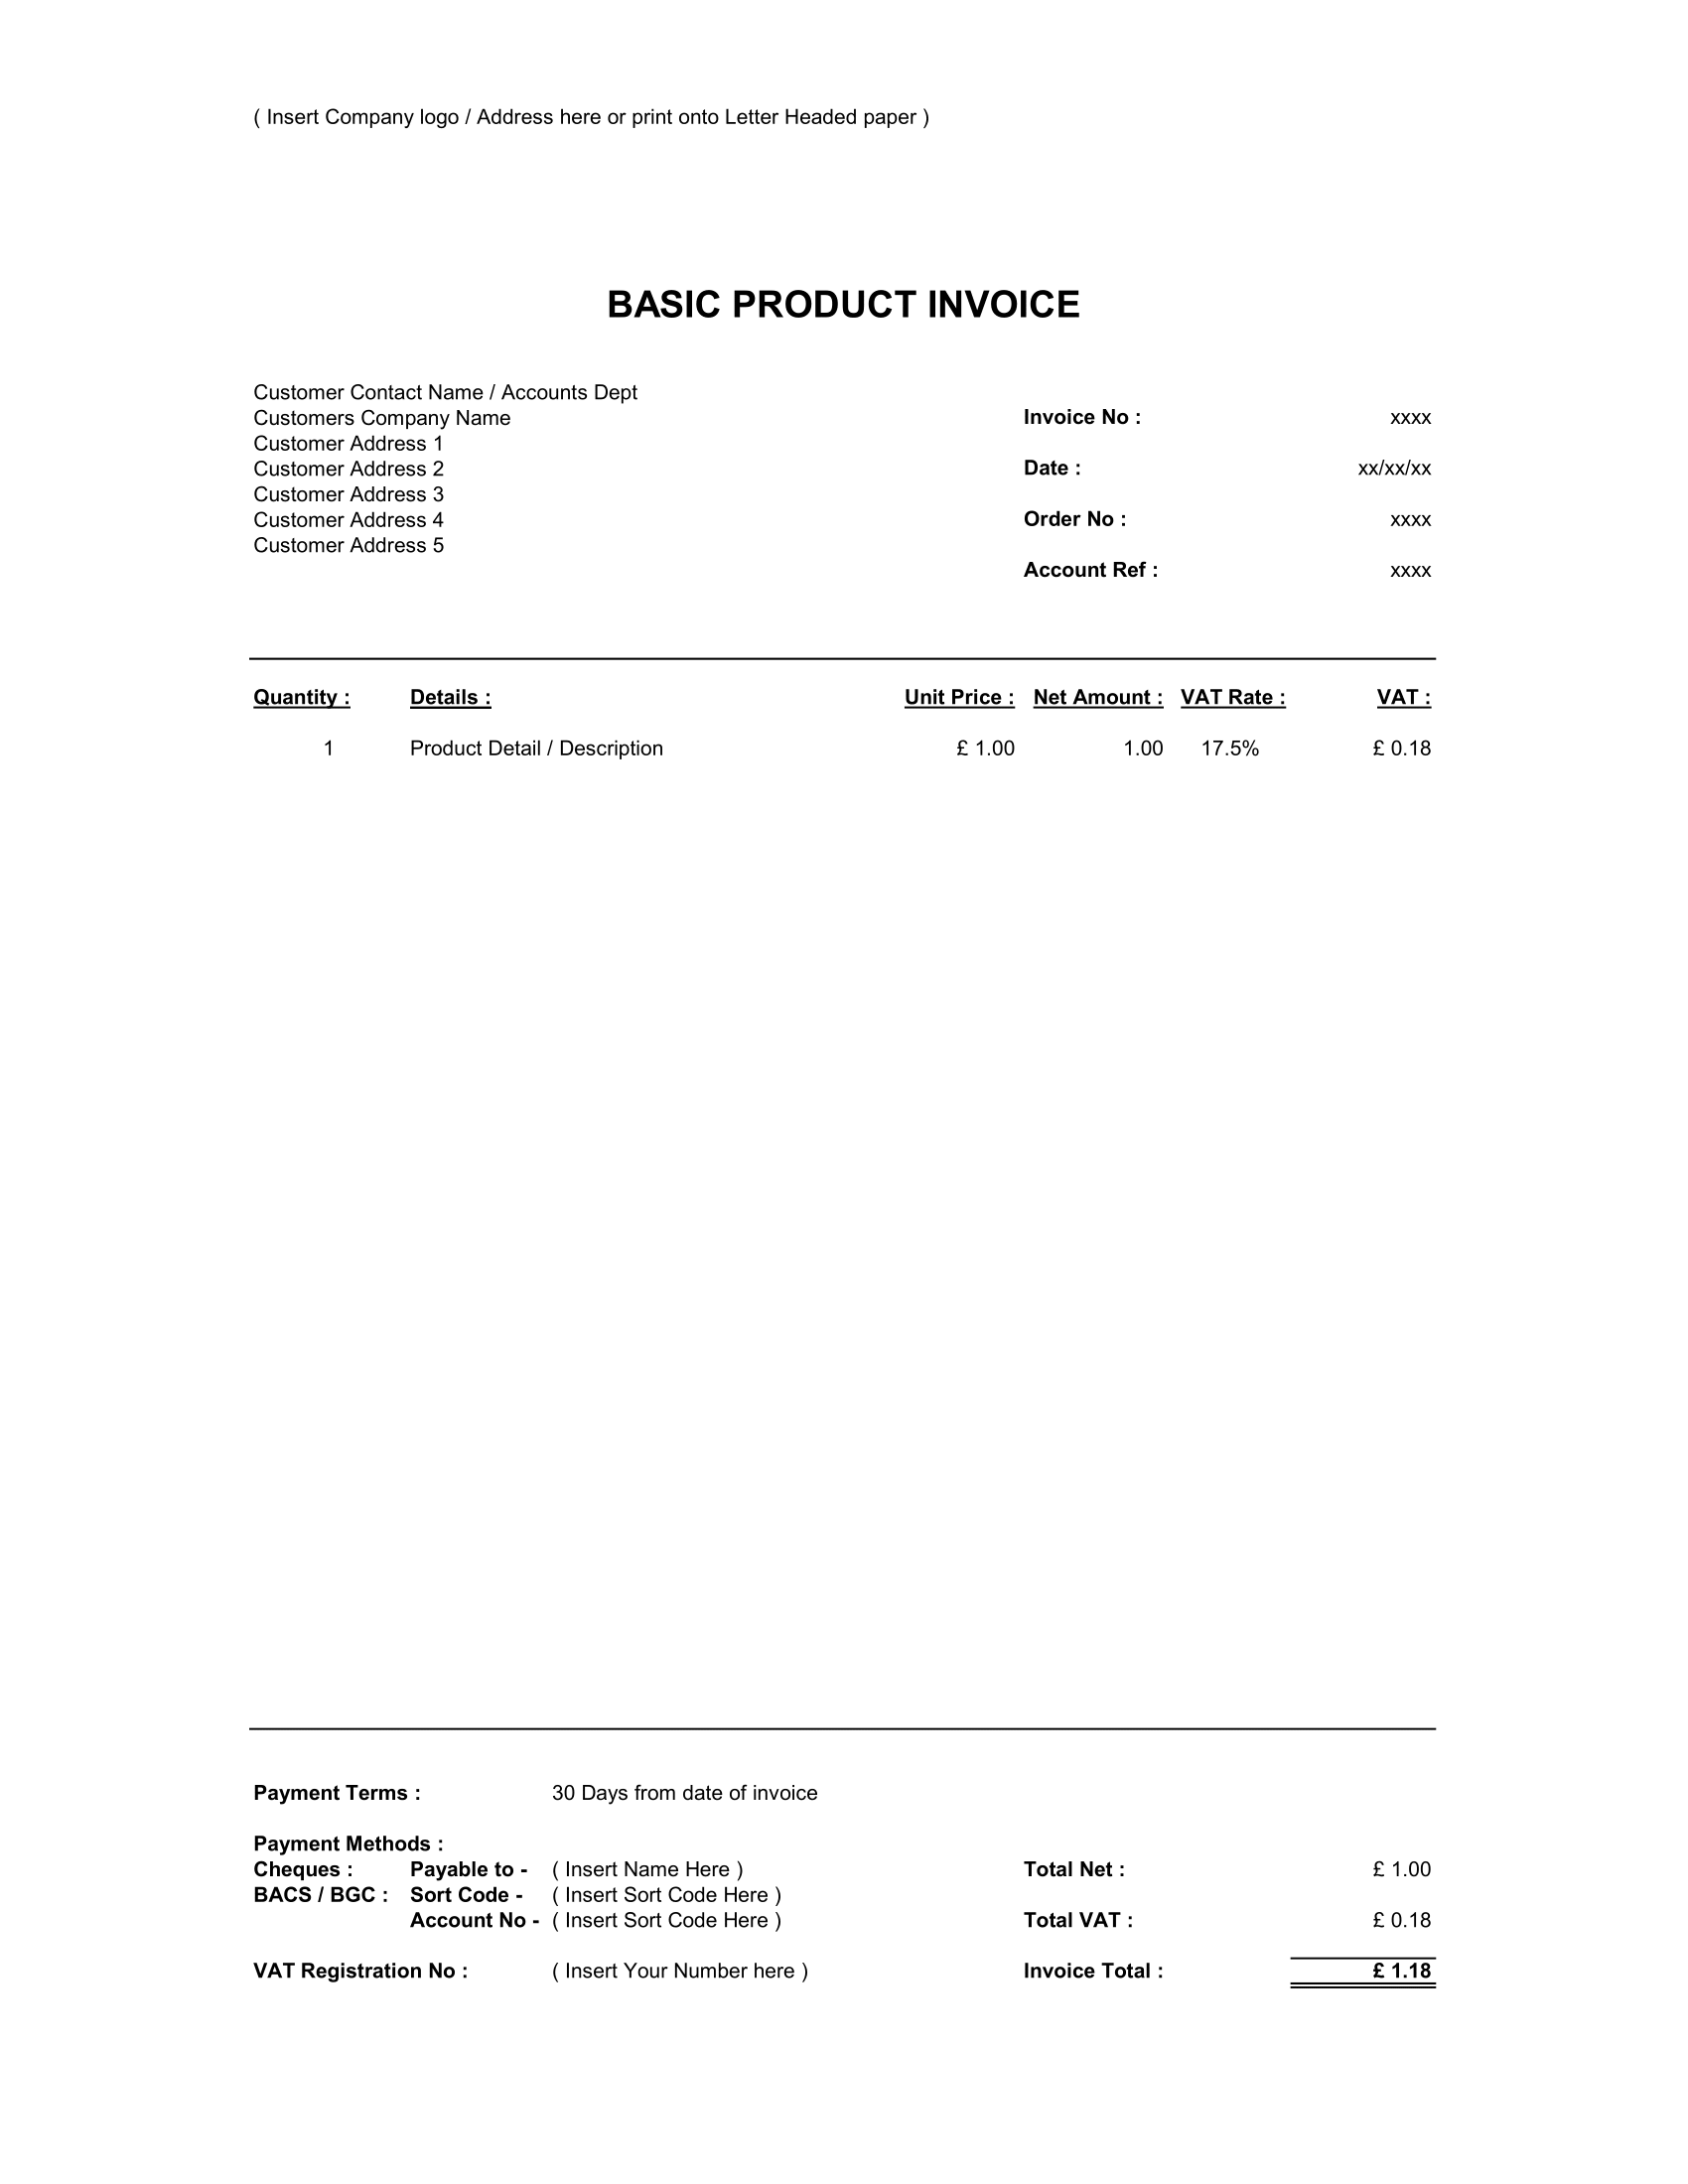 Basic Product and Services Invoice Format In Excel for business use.